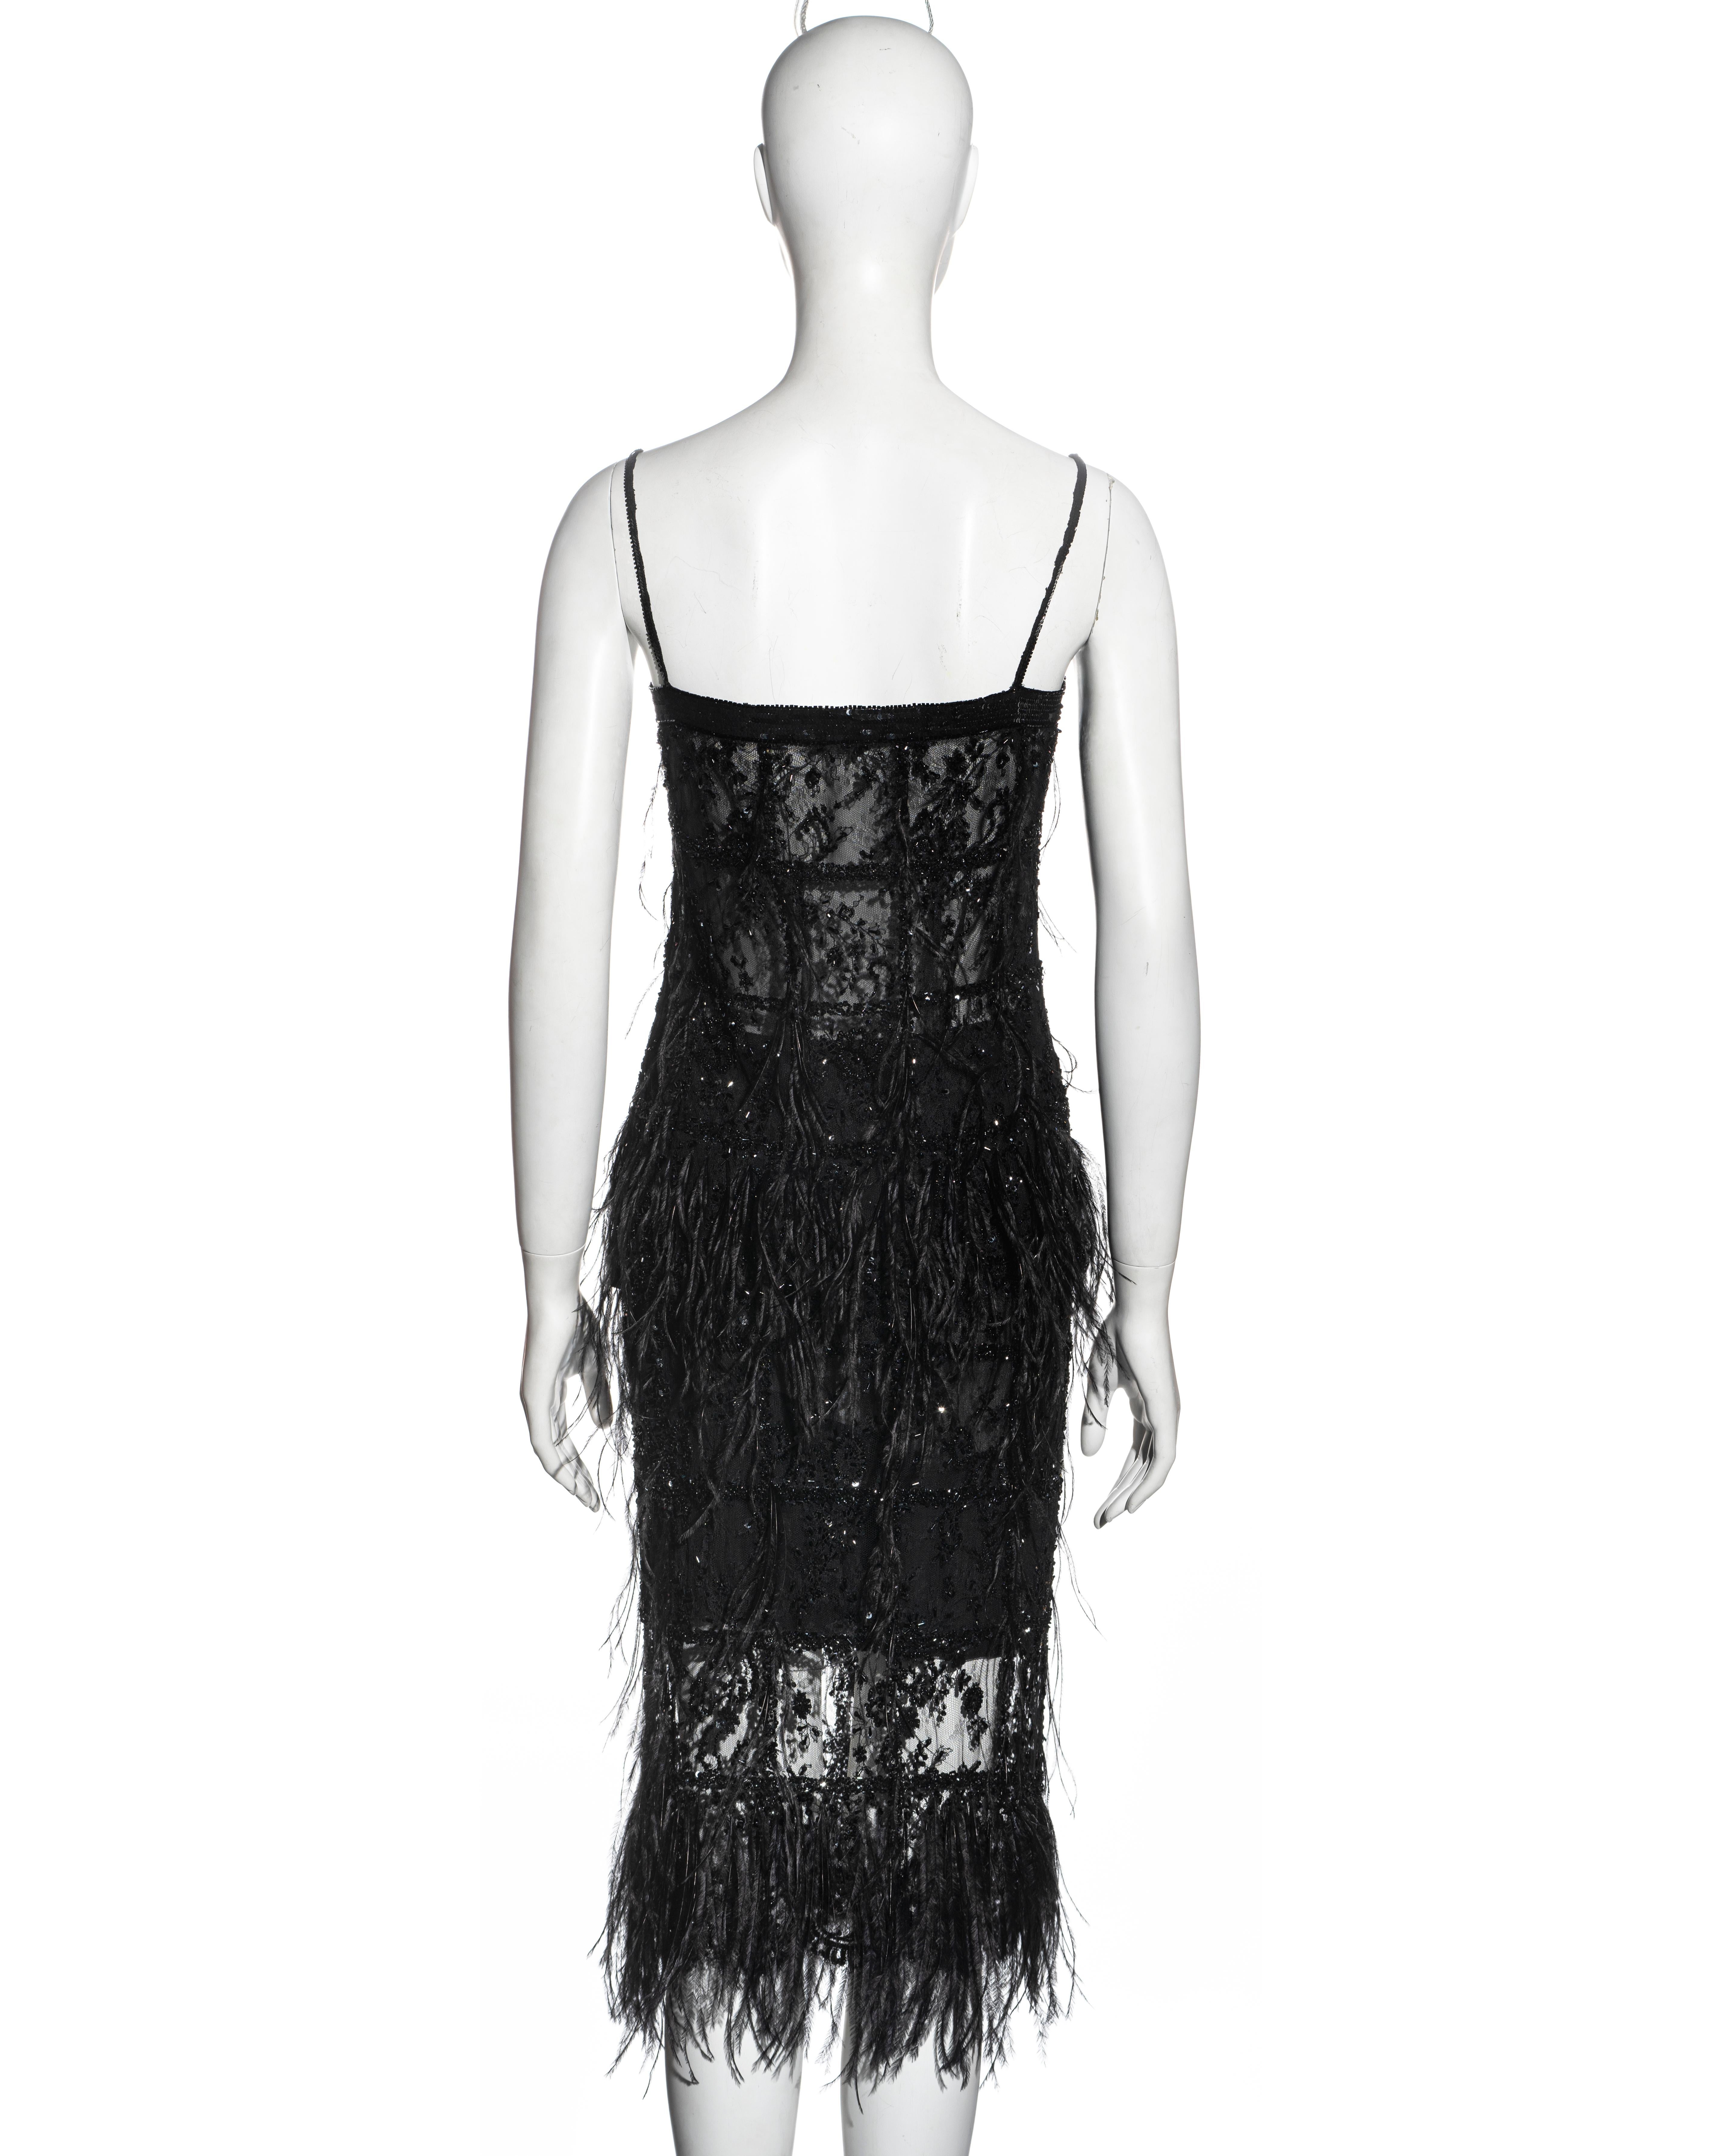 Valentino black beaded lace and ostrich feather evening top and skirt, fw 2001 For Sale 2